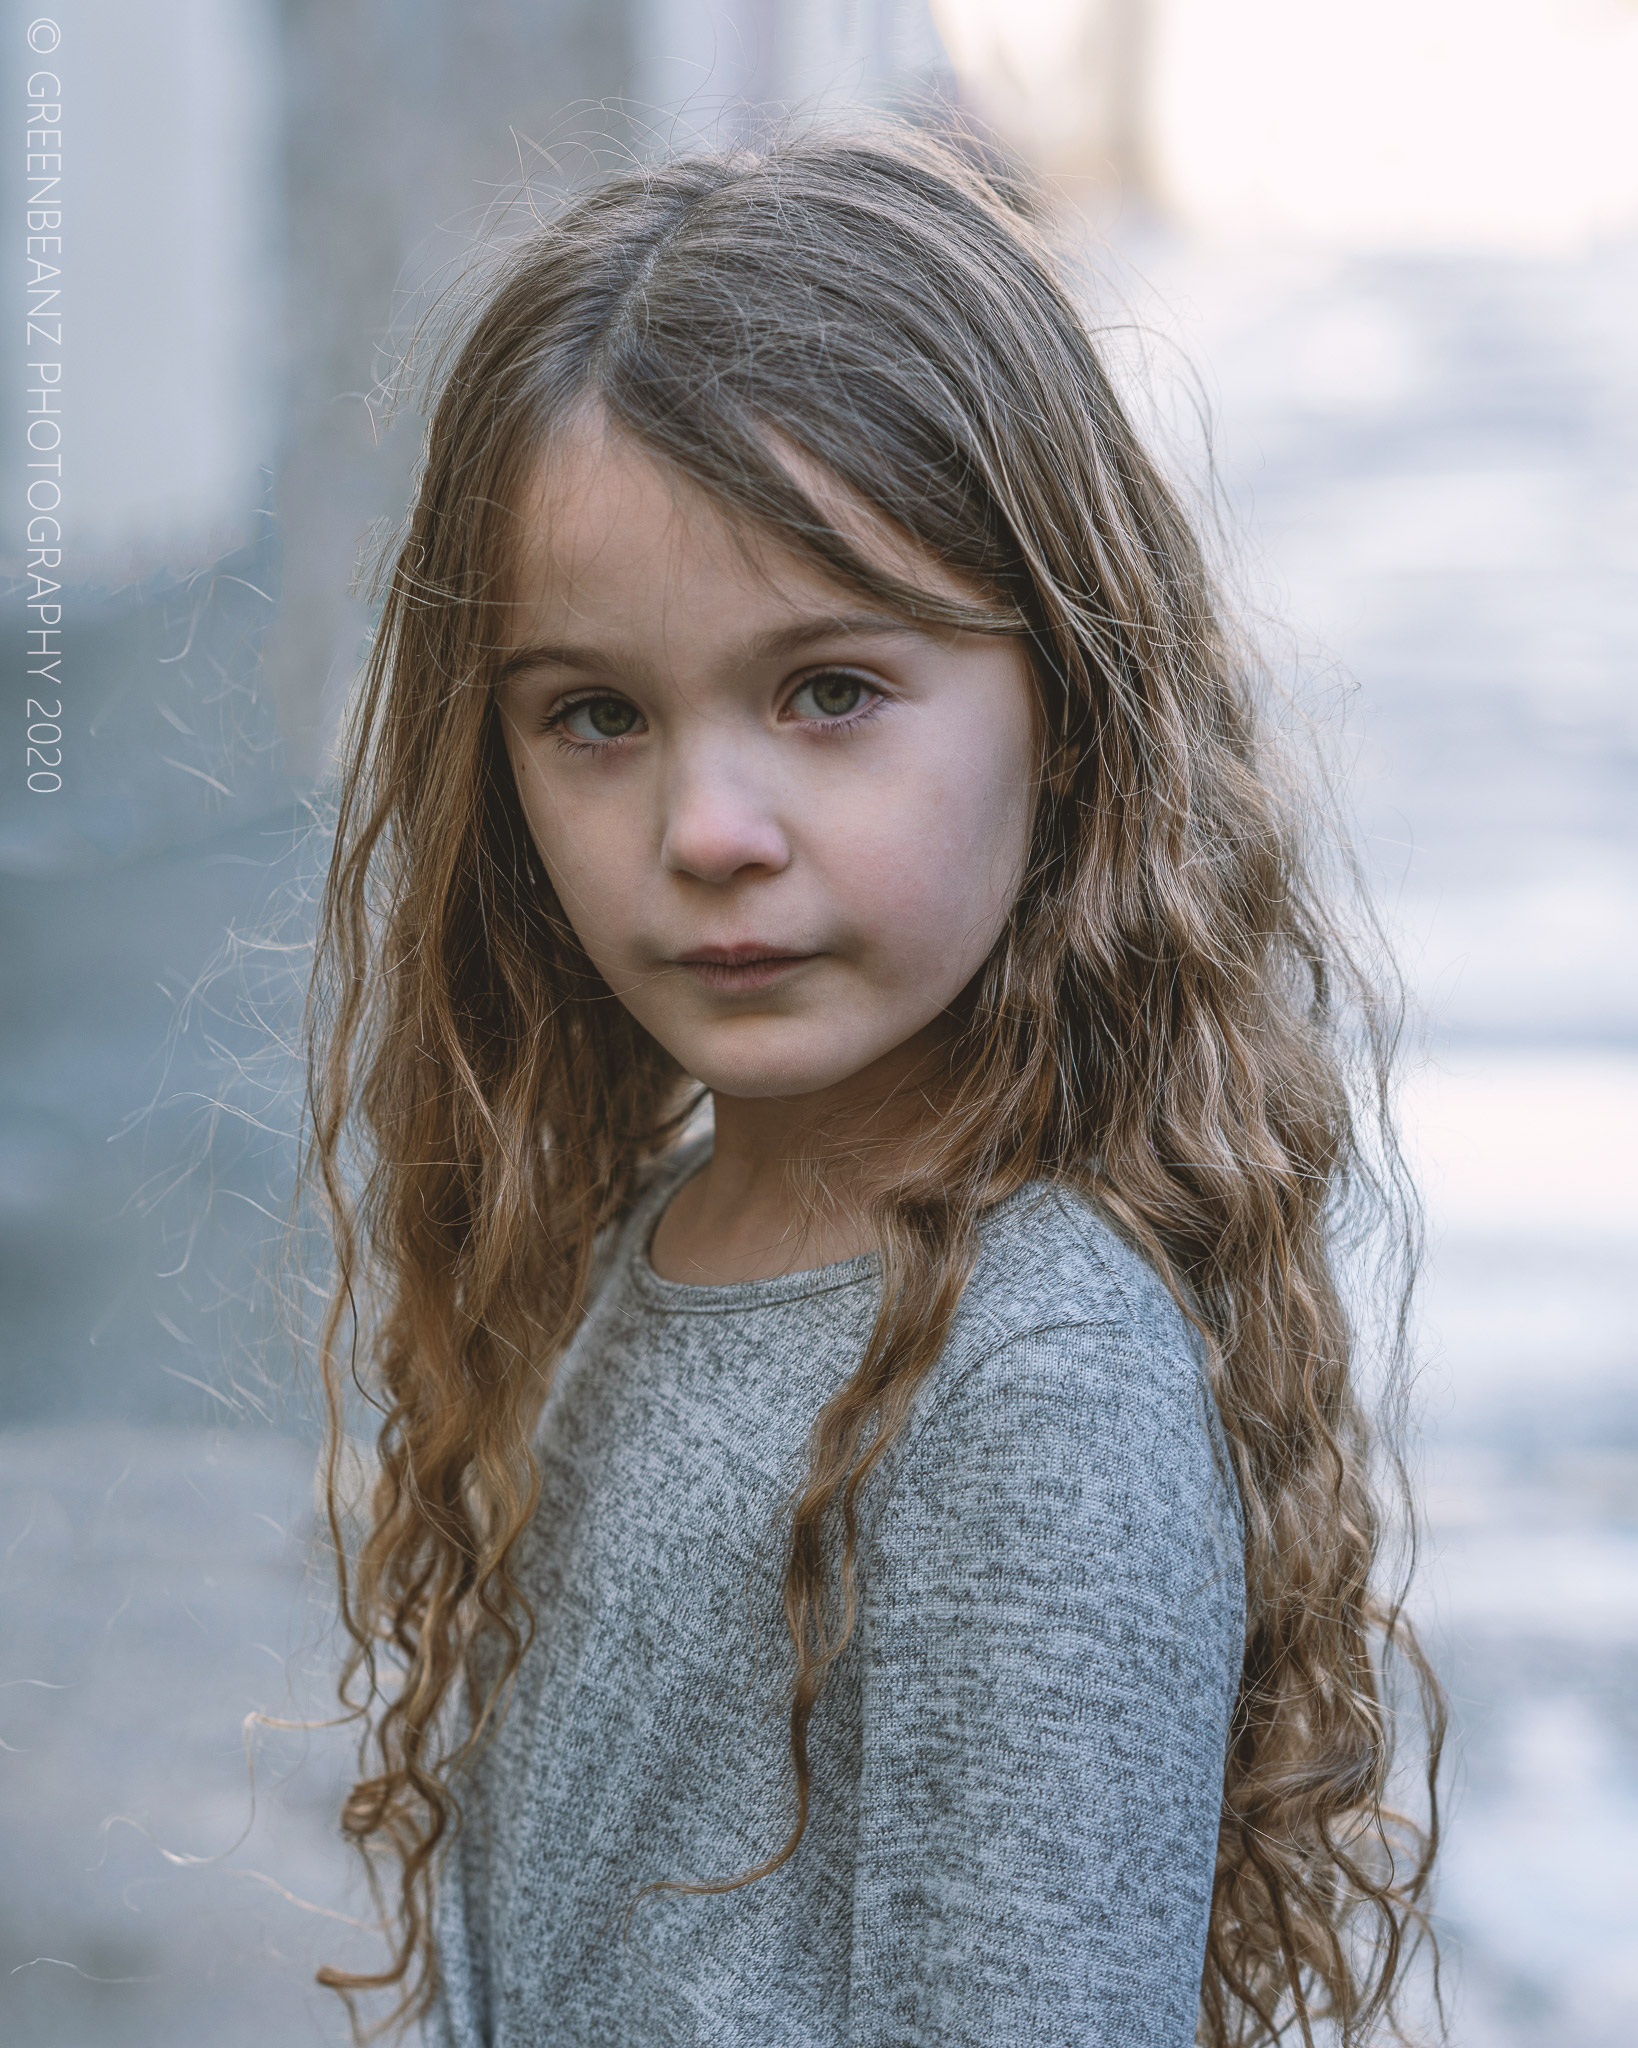 Plymouth young actor Eloise posing in natural light